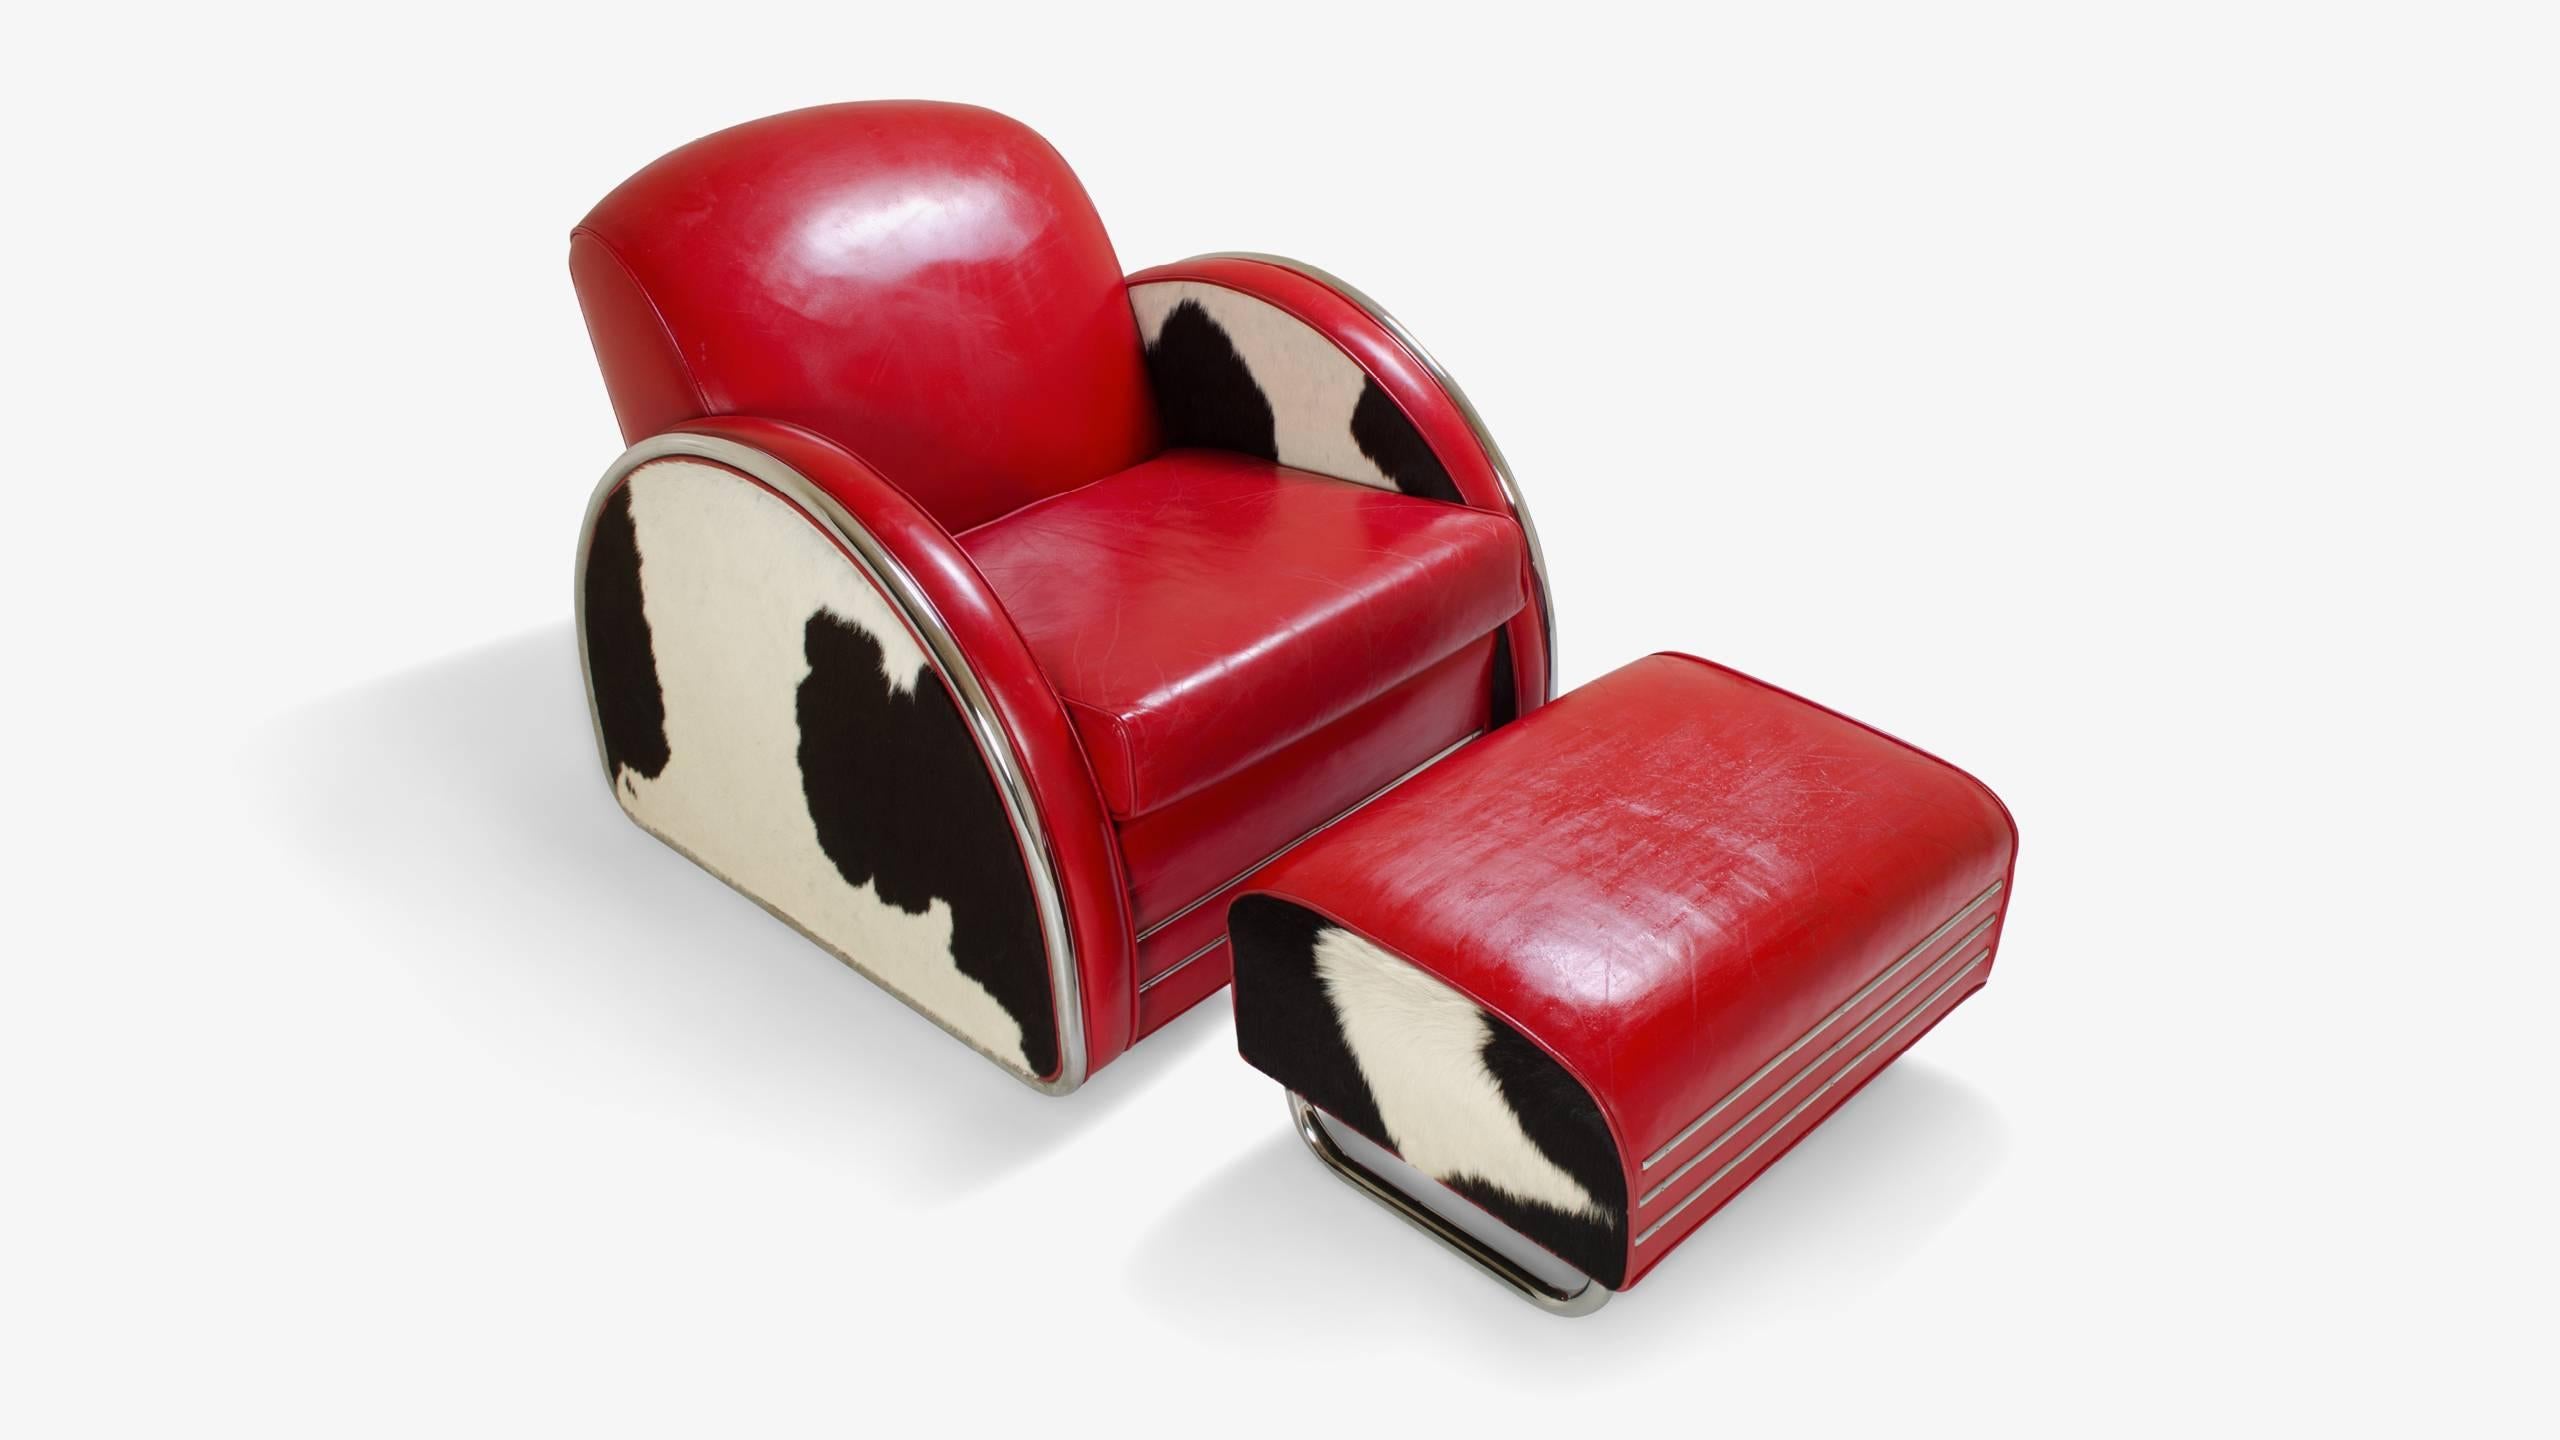 A handsome club chair and ottoman set designed after Art-Deco Jazz pieces of the 1980s. This piece is incredibly well built using spectacular materials. Leather, hair on hide, and chrome all work in concert as the framework of his design piece. The